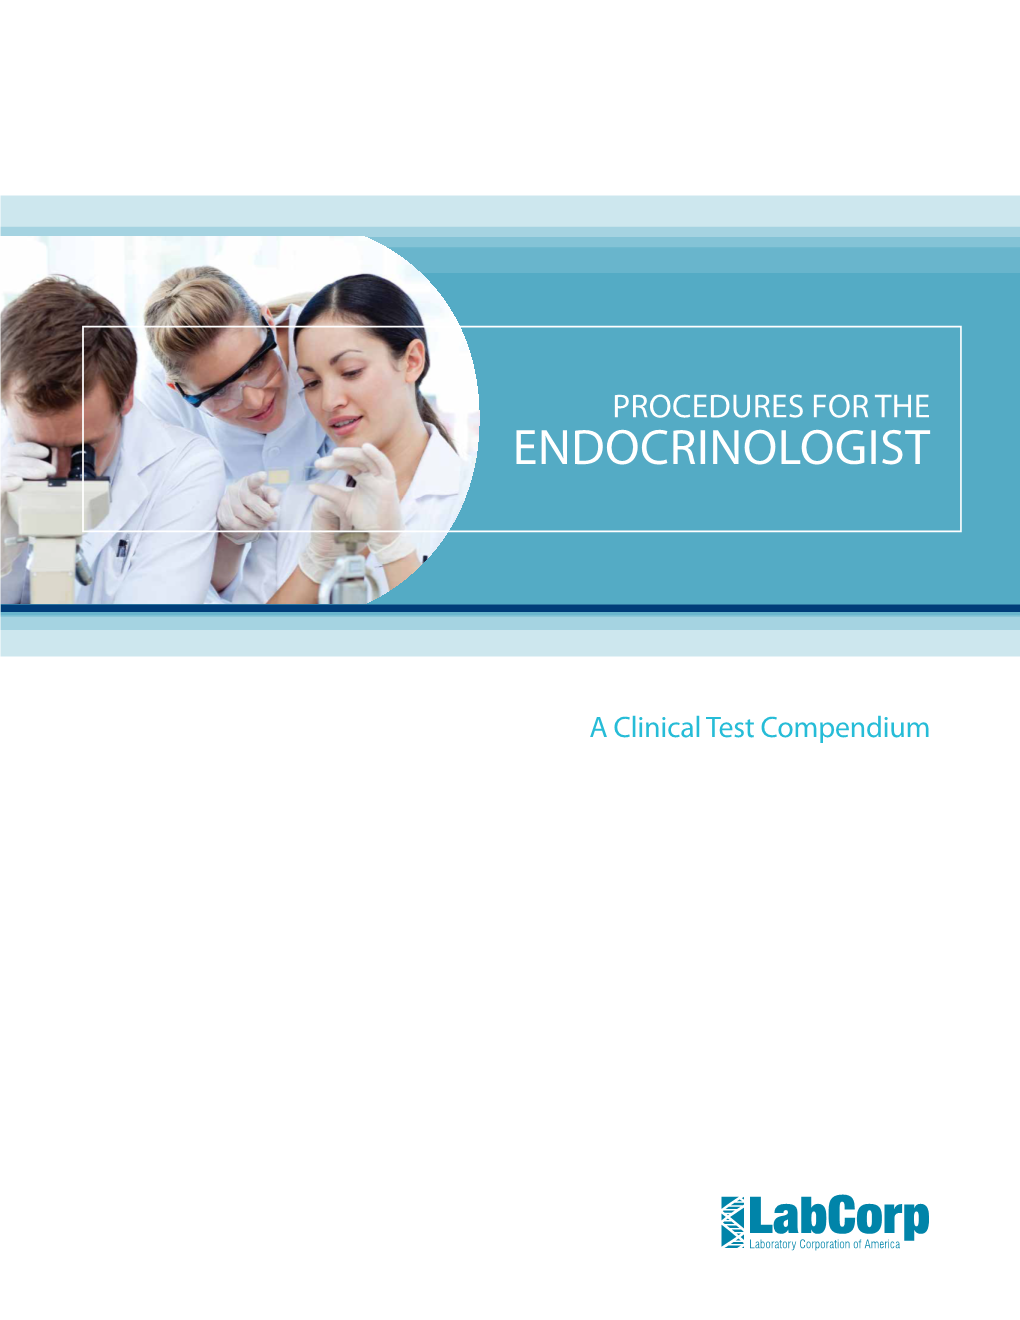 Procedures for the Endocrinologist